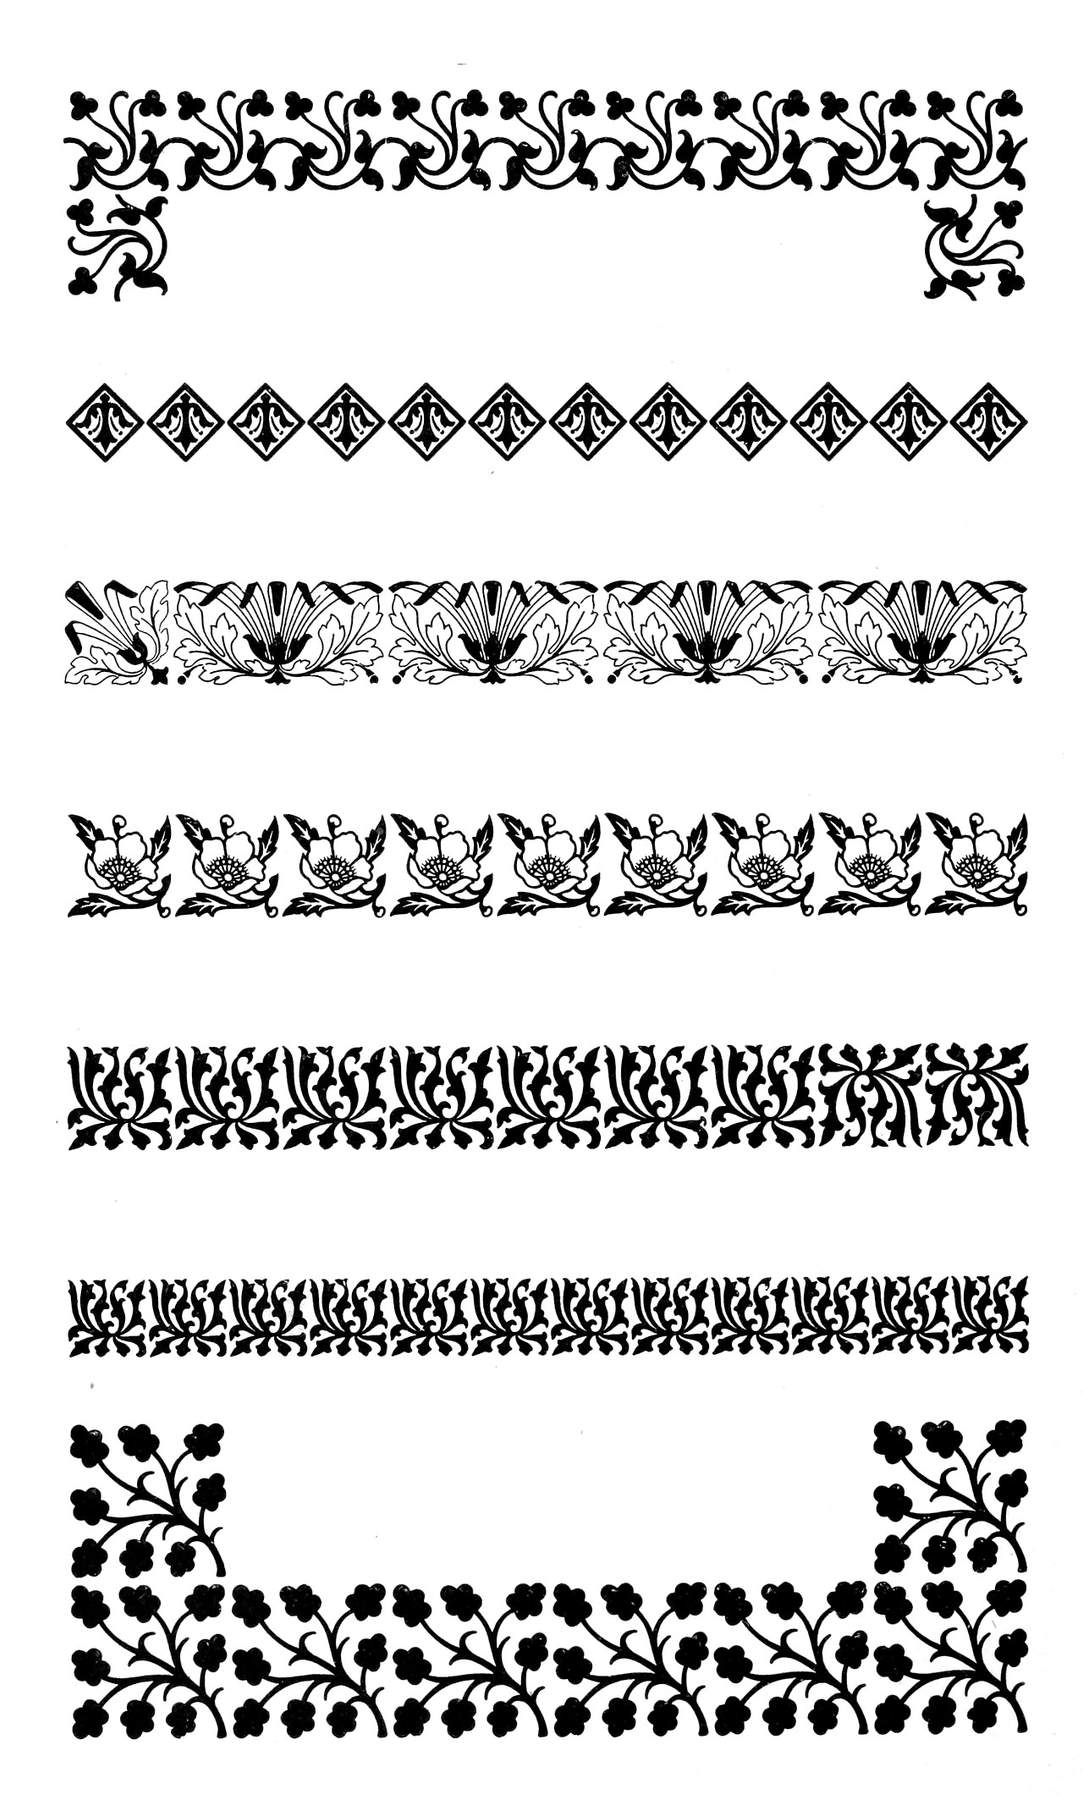 Specimens of printed floral borders from an 1897 type foundry specimen book.